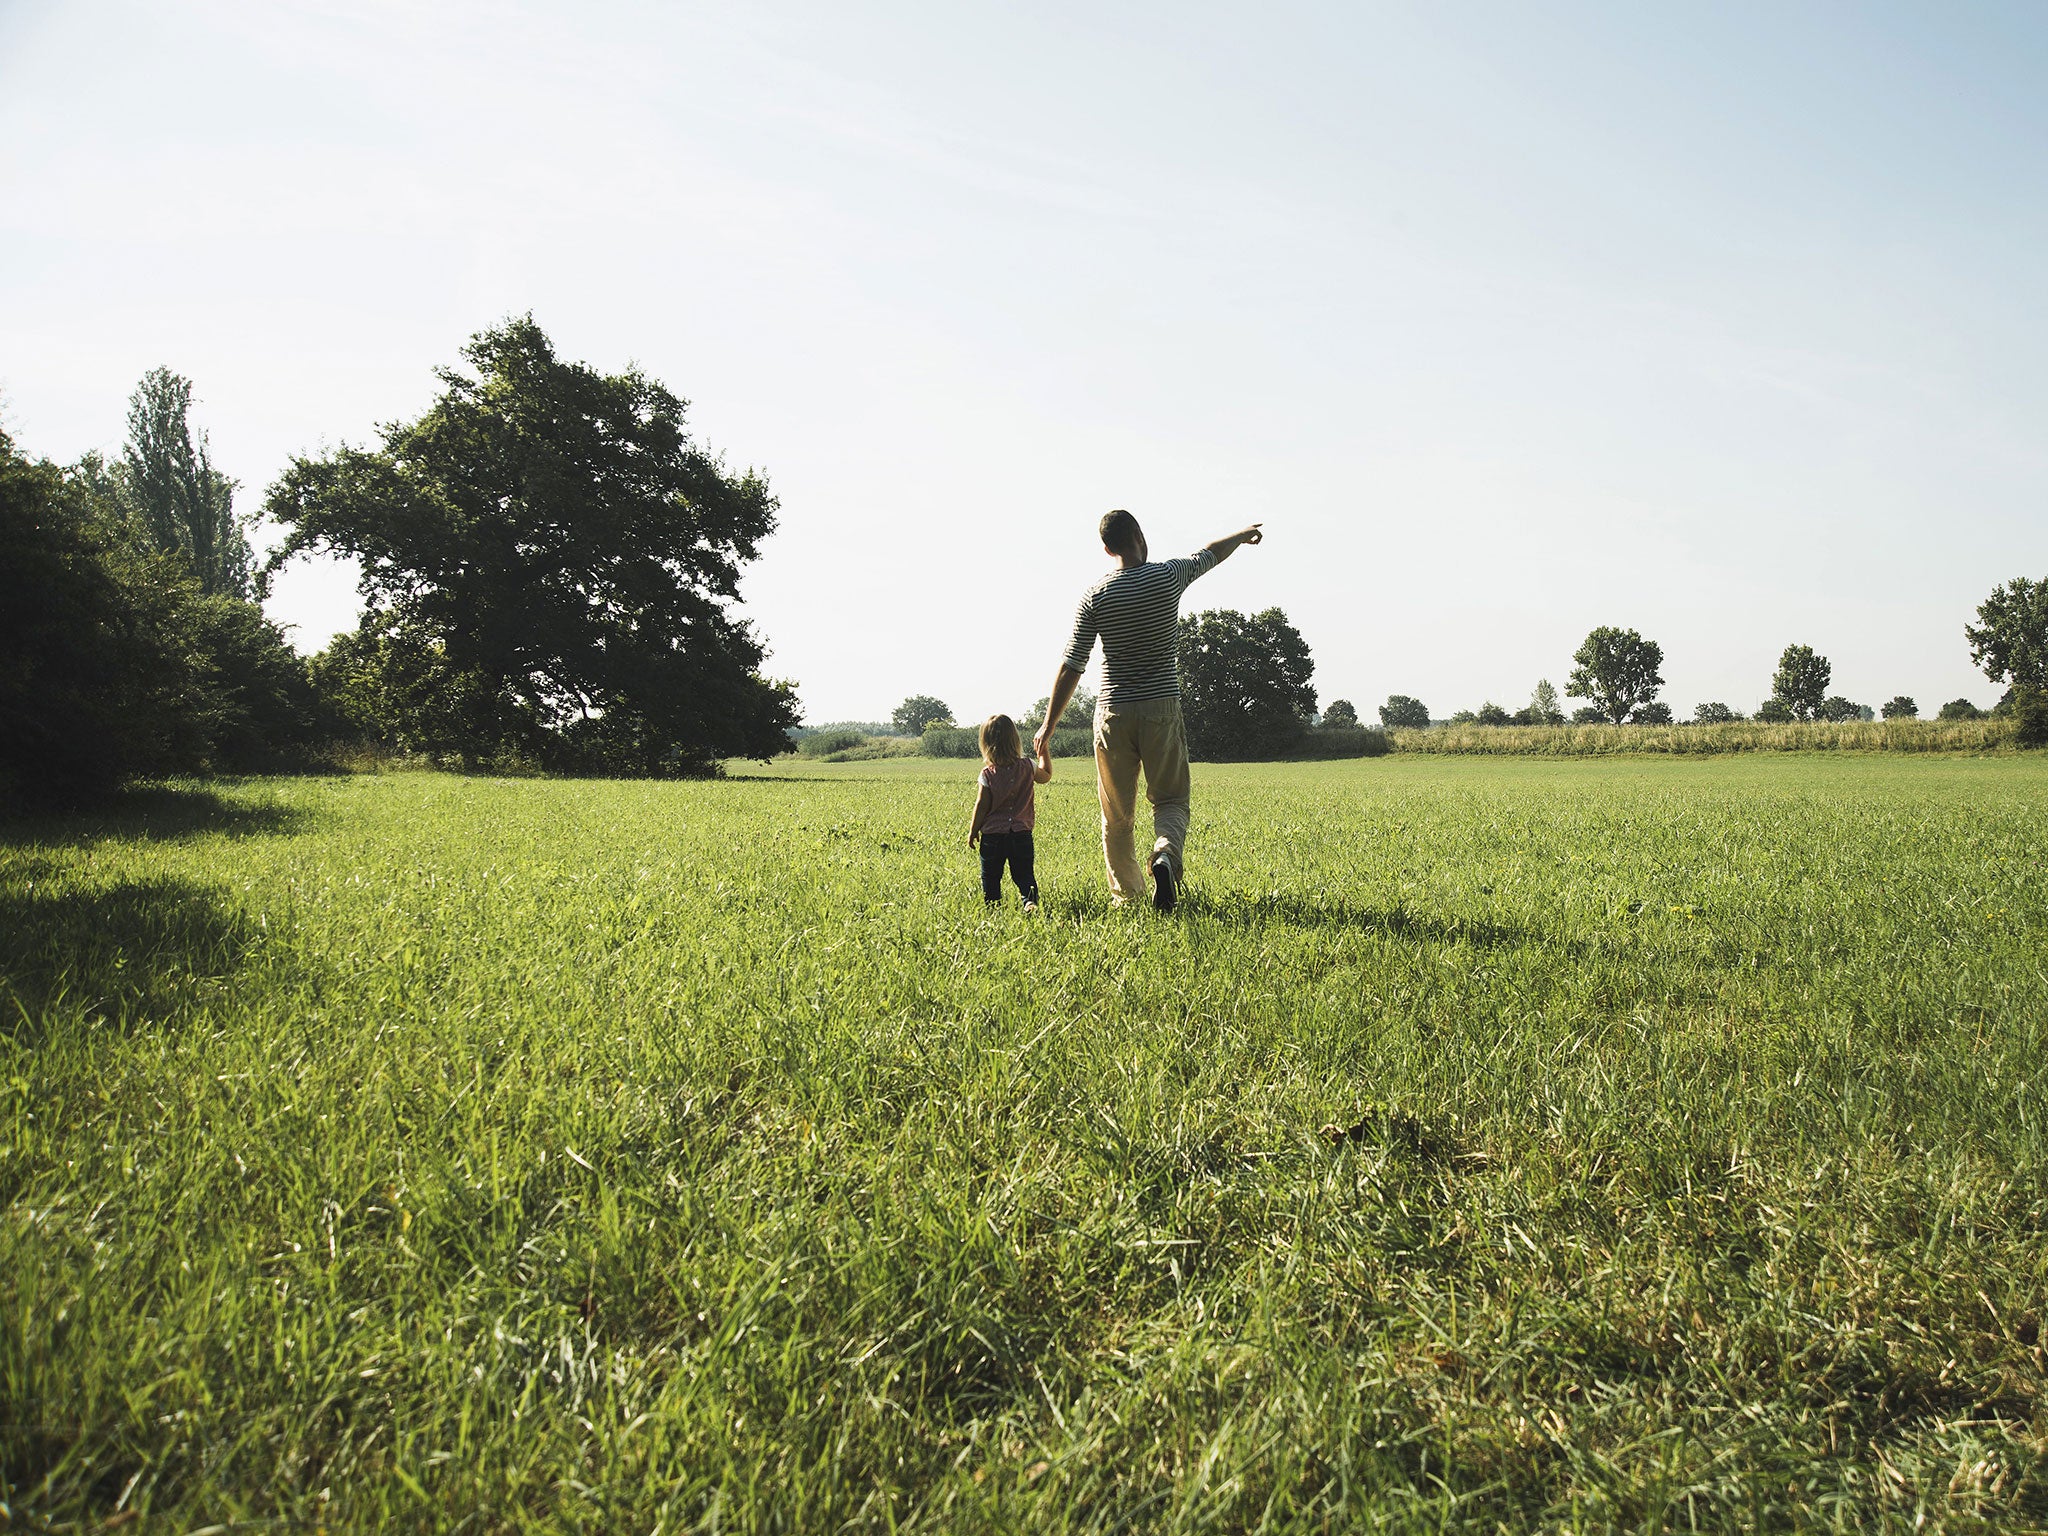 Father walking with his little daughter on a meadow